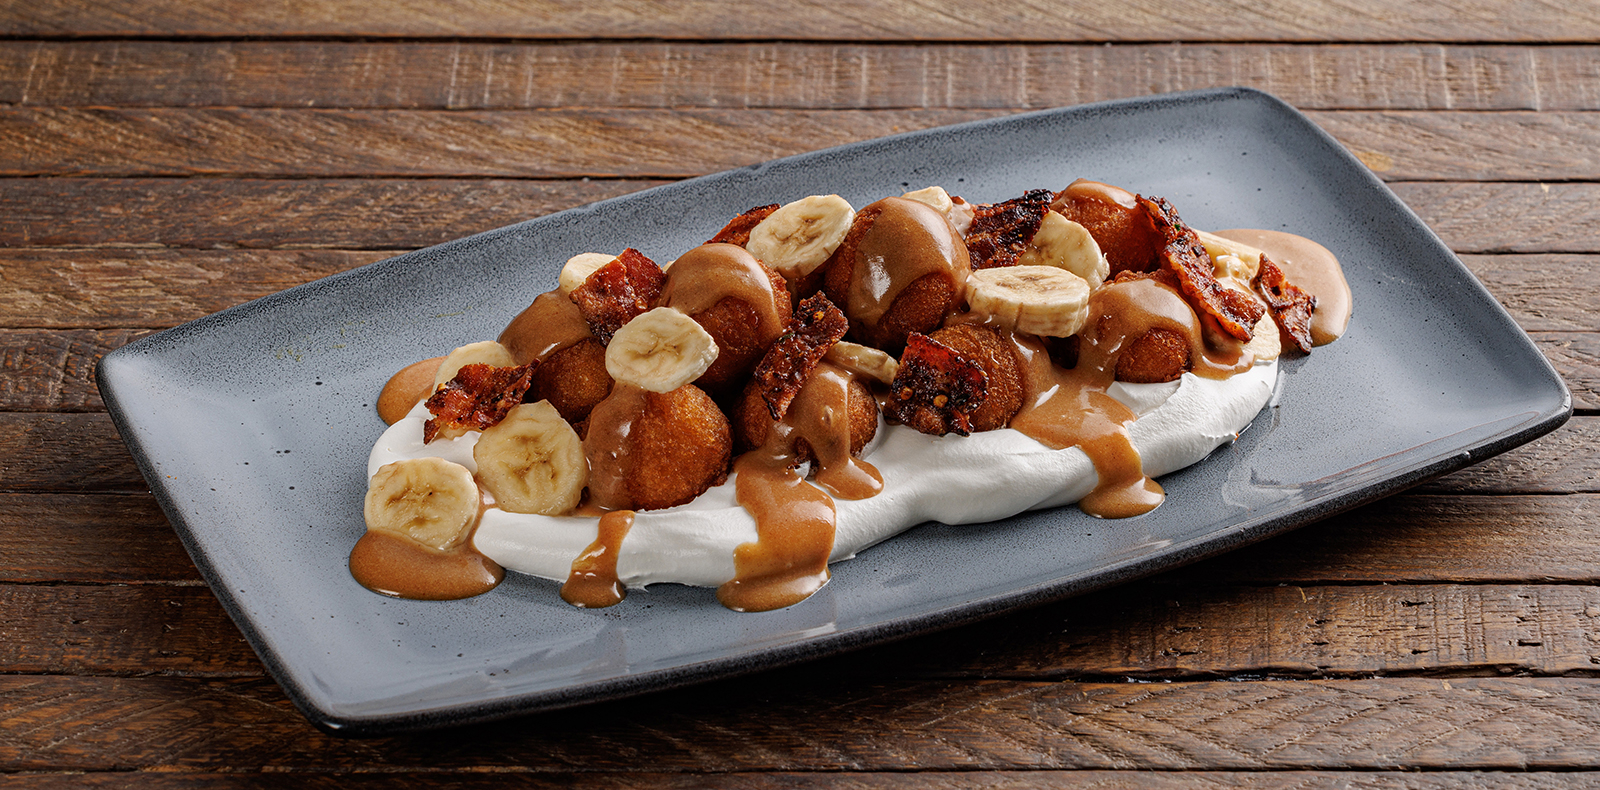 Made to order and drizzled with peanut butter caramel, bacon candy, sliced bananas + whipped cream. Available on Lazy Dog’s brunch menu. Kid’s Chocolate Chip Pancakes: Chocolate chip pancakes with maple syrup and whipped cream